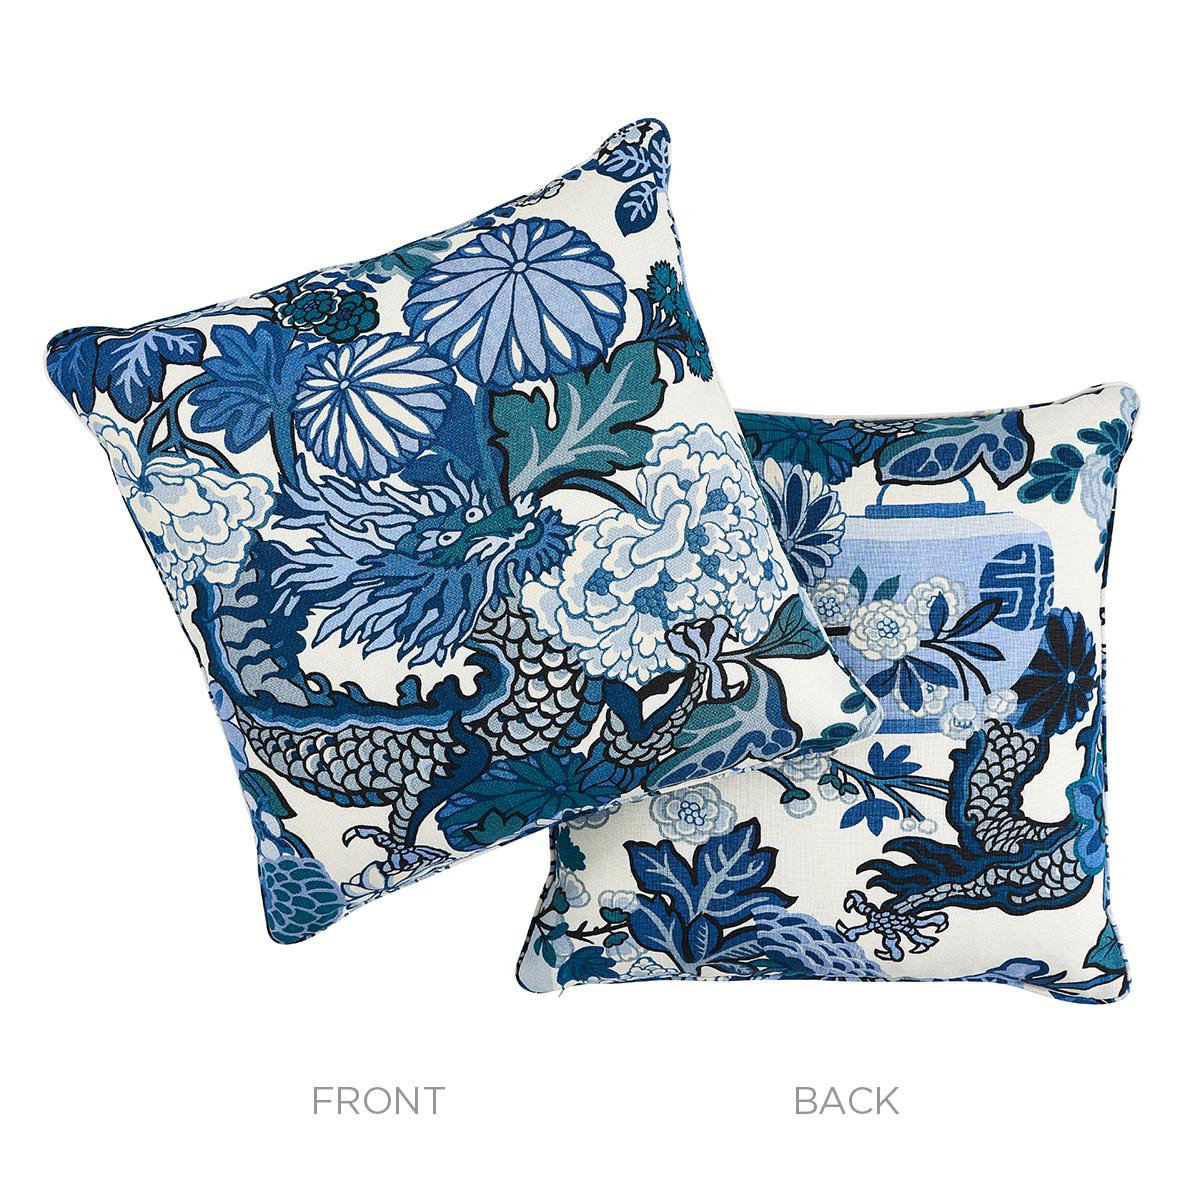 This pillow features Chiang Mai Indoor/Outdoor with a self welt finish. One of our best-loved designs, this Art Deco-inspired chinoiserie motif has been adapted into a chic outdoor fabric. Pillow includes a polyfill insert and hidden zipper closure.